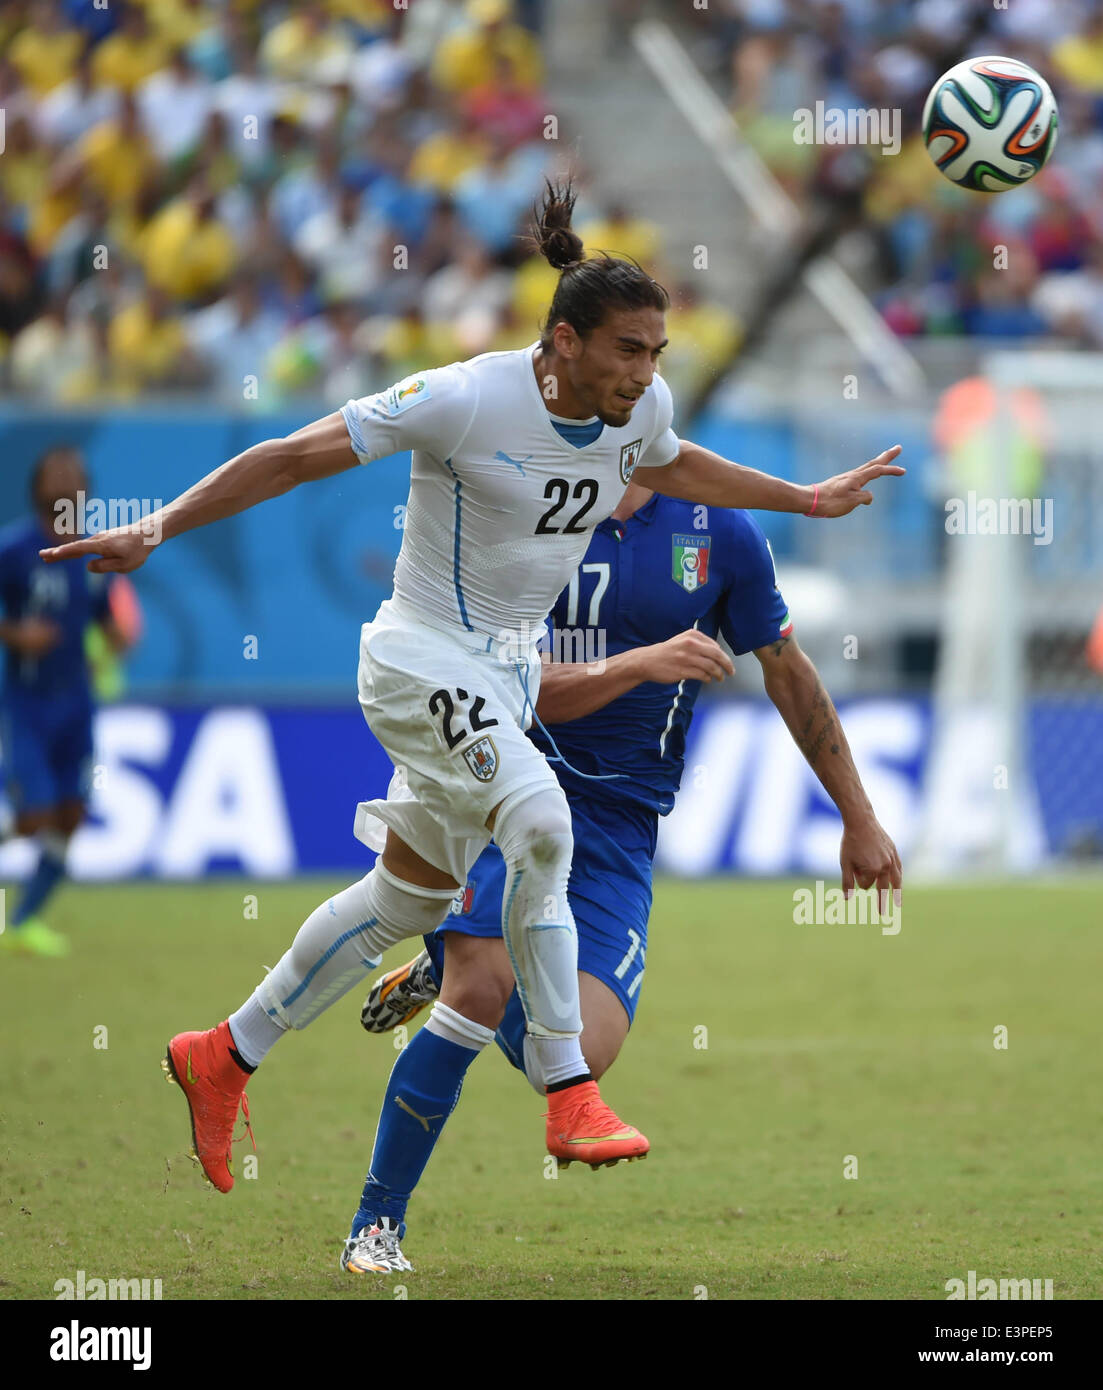 Natal, Brazil. 24th June, 2014. Uruguay's Martin Caceres vies for the ball with Italy's Ciro Immobile during a Group D match between Italy and Uruguay of 2014 FIFA World Cup at the Estadio das Dunas Stadium in Natal, Brazil, June 24, 2014. © Guo Yong/Xinhua/Alamy Live News Stock Photo